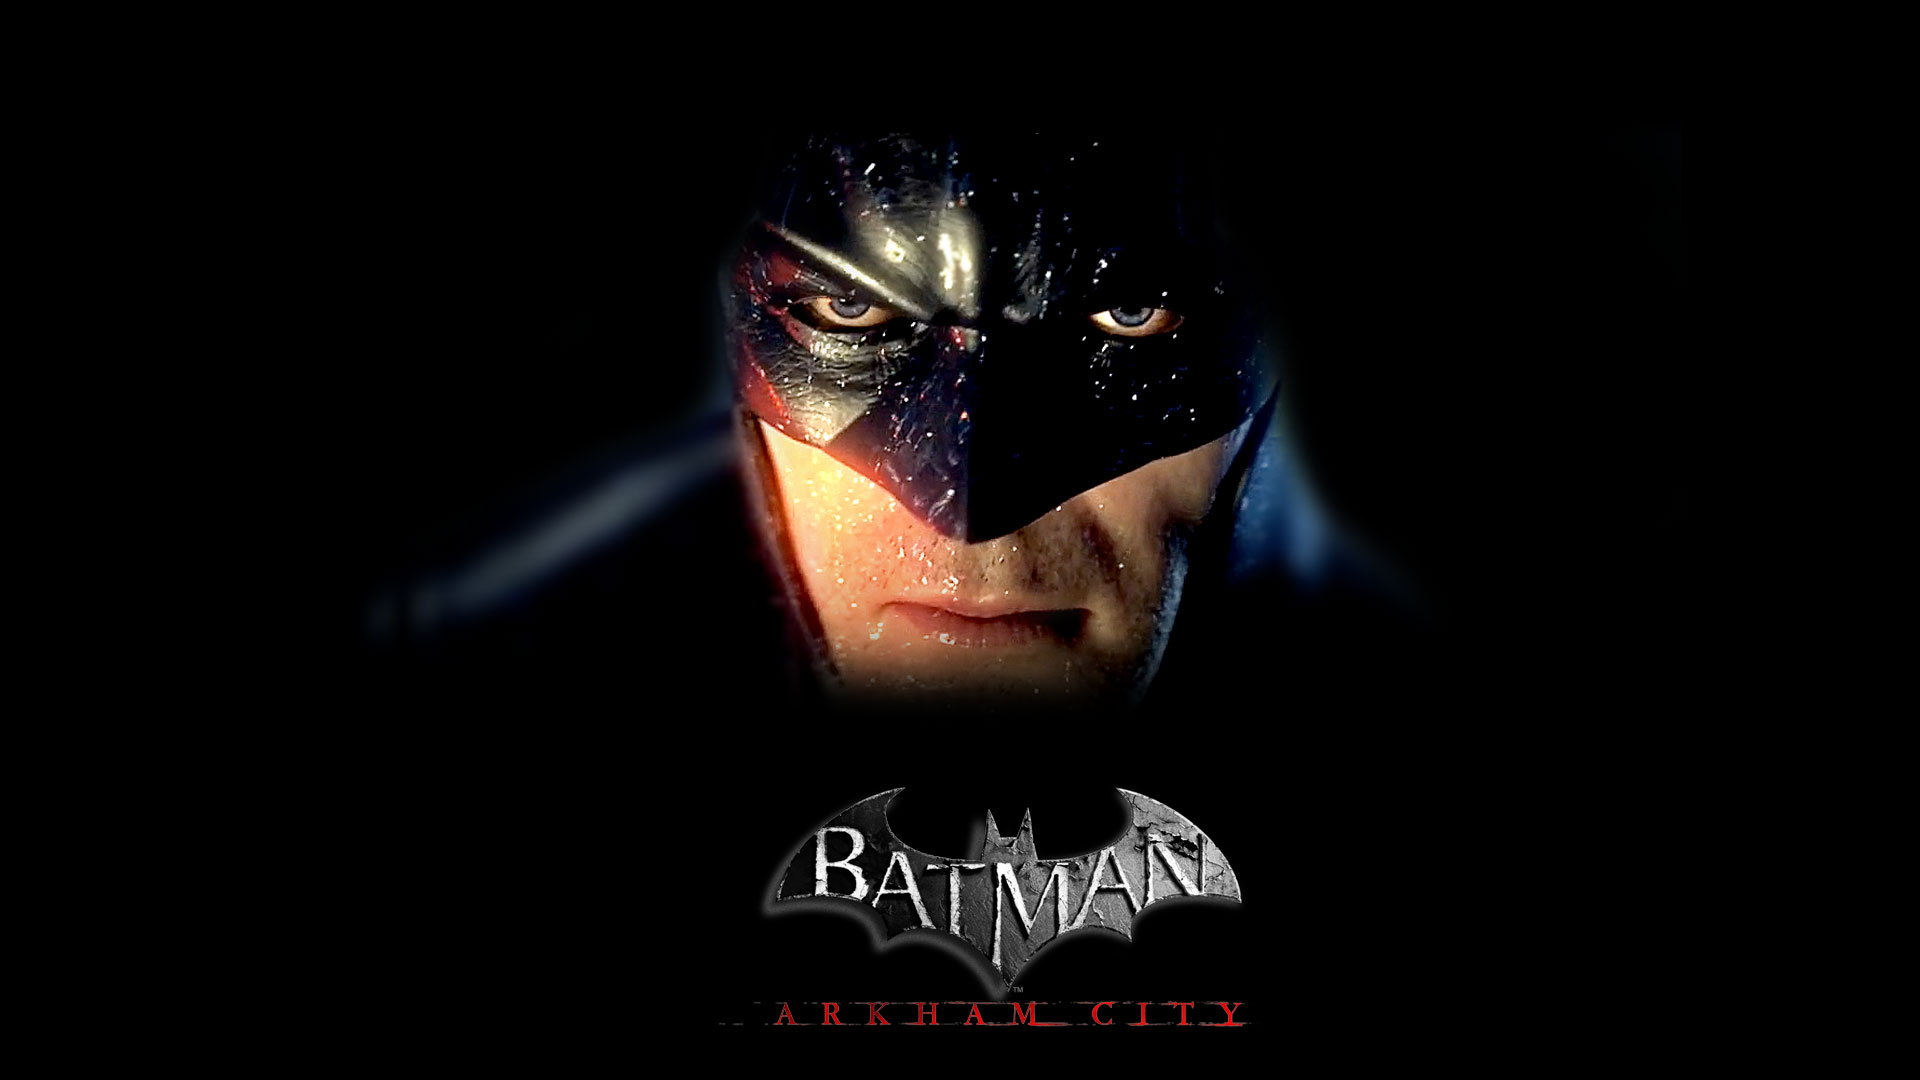 Batman Arkham City Wallpapers in HD High Resolution Page 3 1920x1080